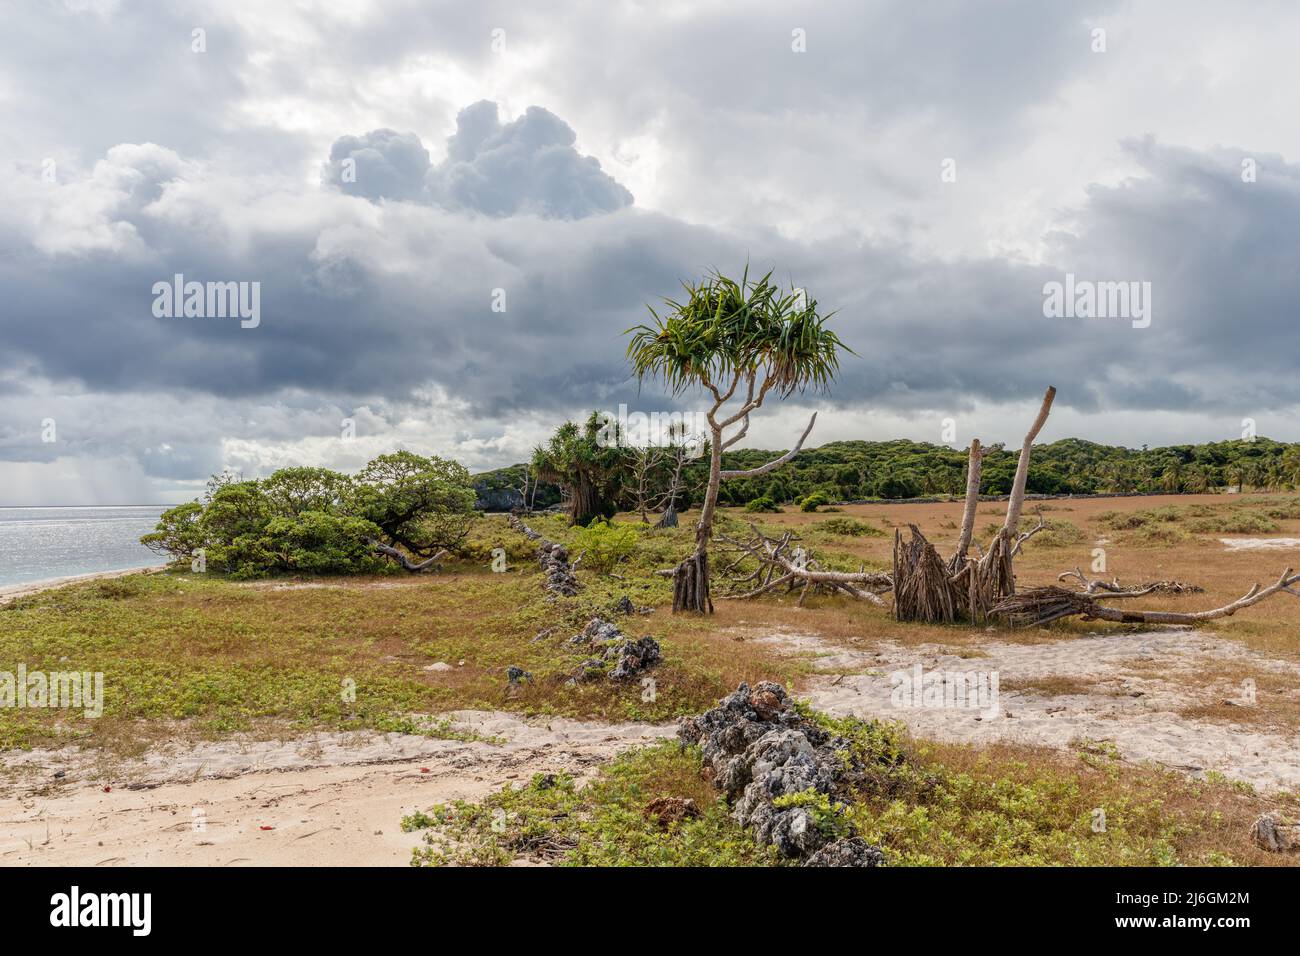 Savanna landscape with stormy clouds of Boa Beach at Rote Island, East Nusa Tenggara province, Indonesia. Stock Photo